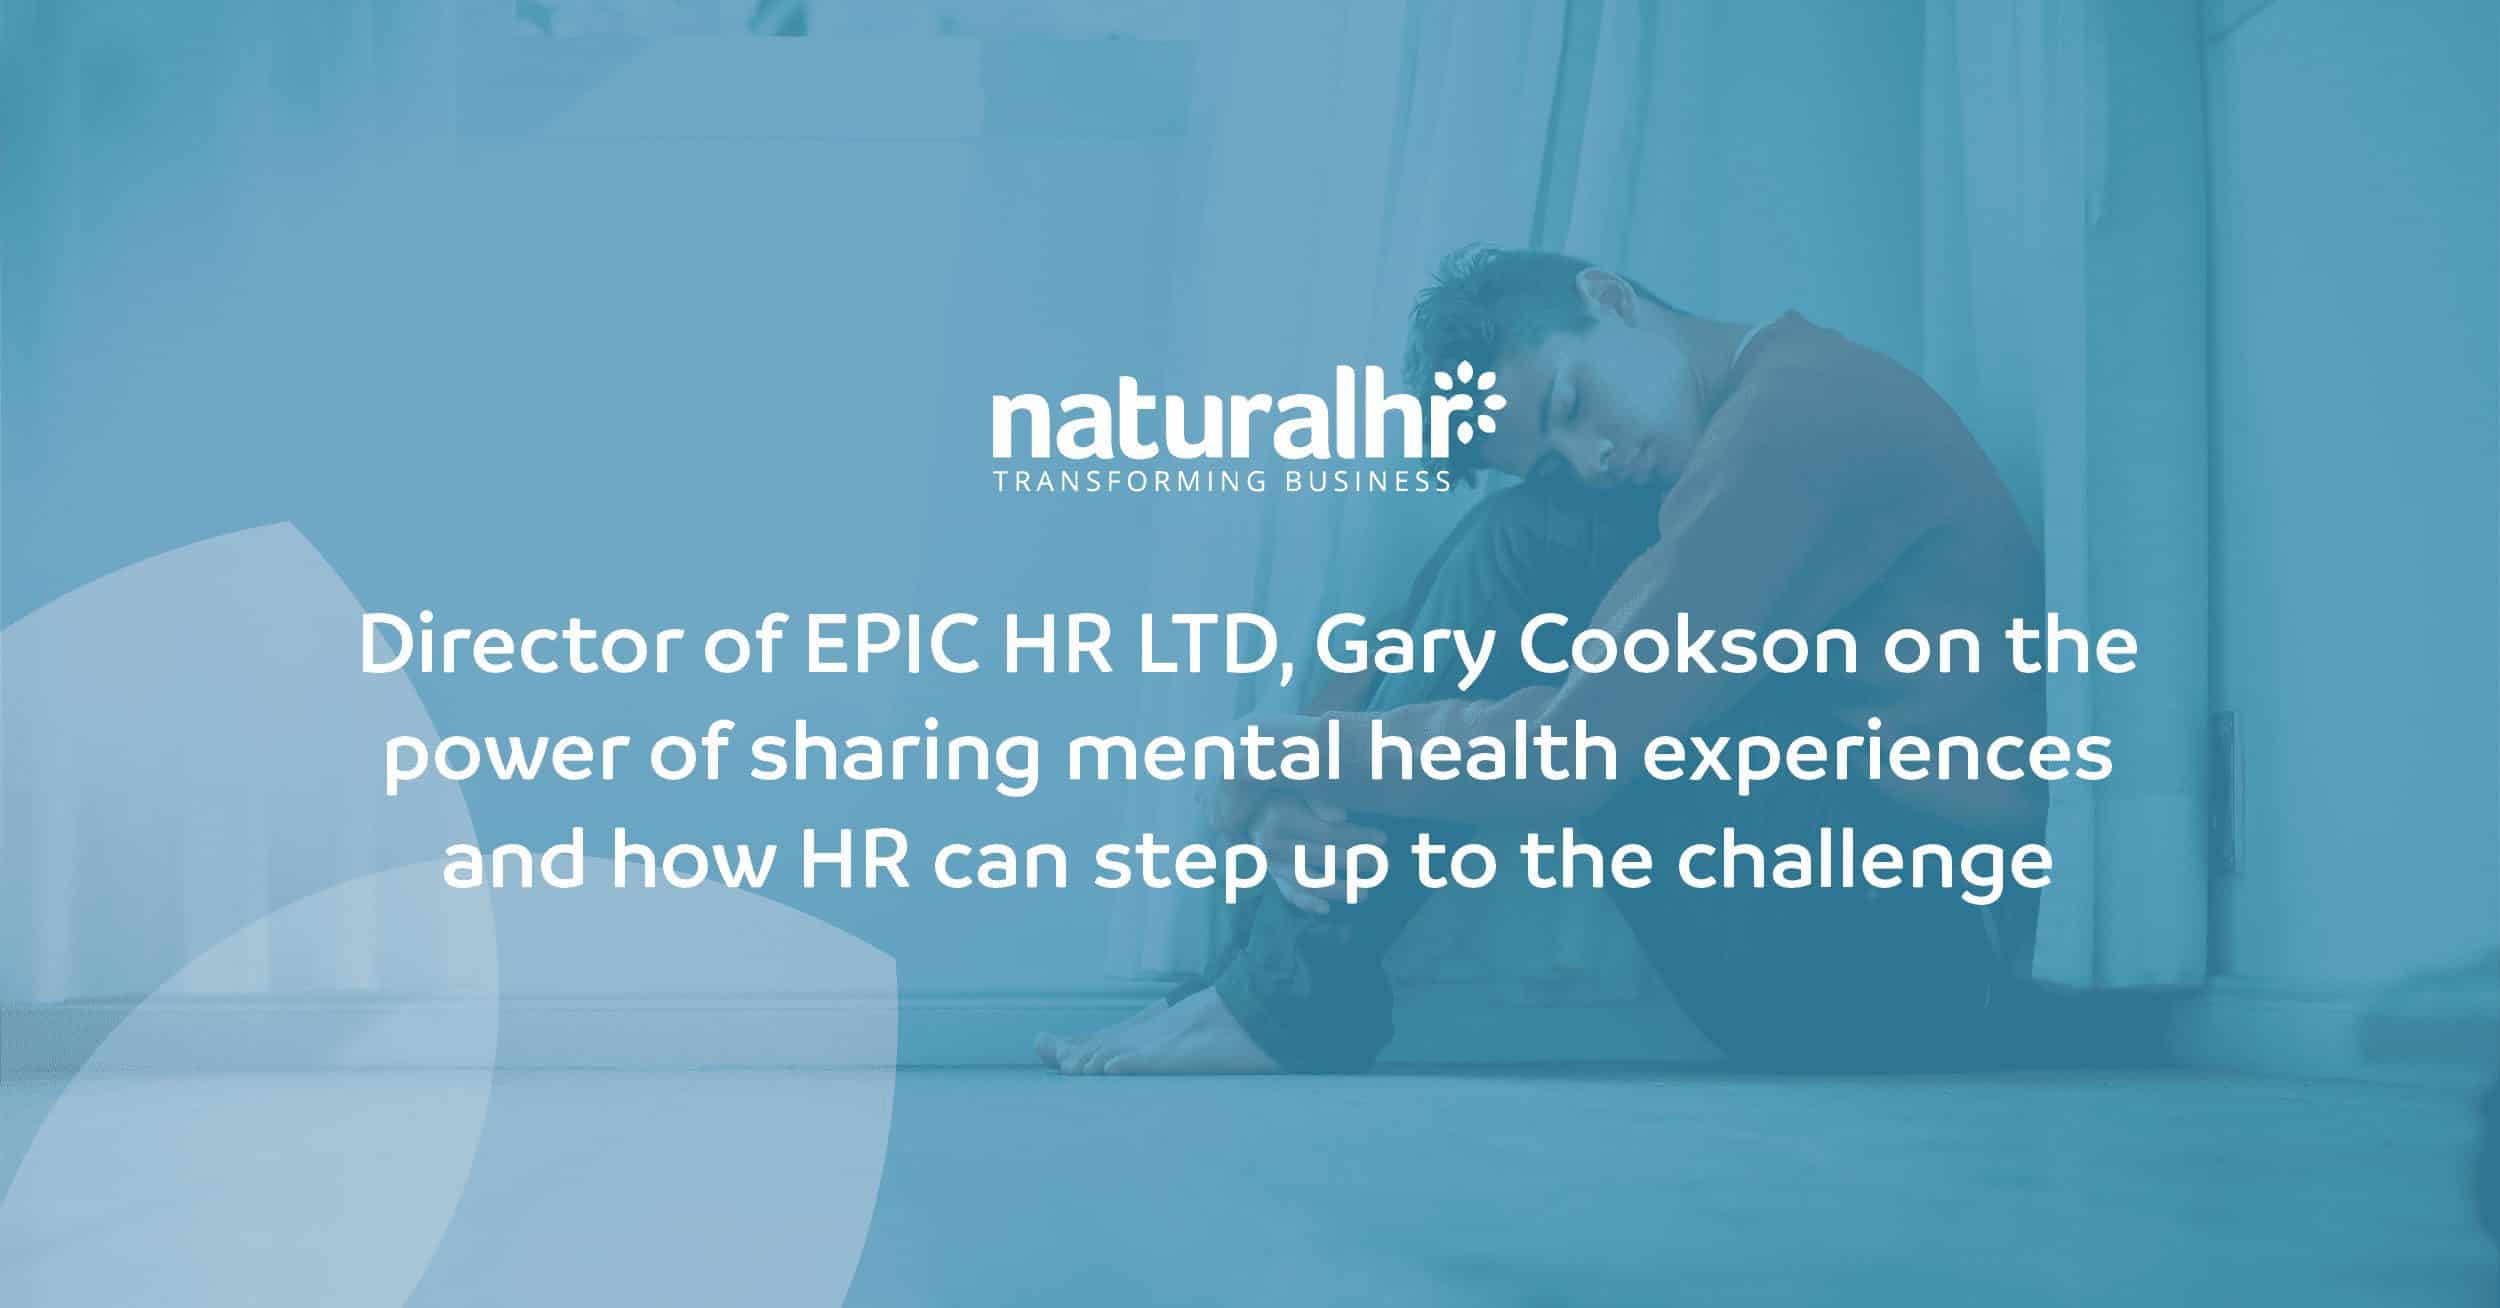 Director of EPIC HR LTD, Gary Cookson opens up about his own mental health experiences